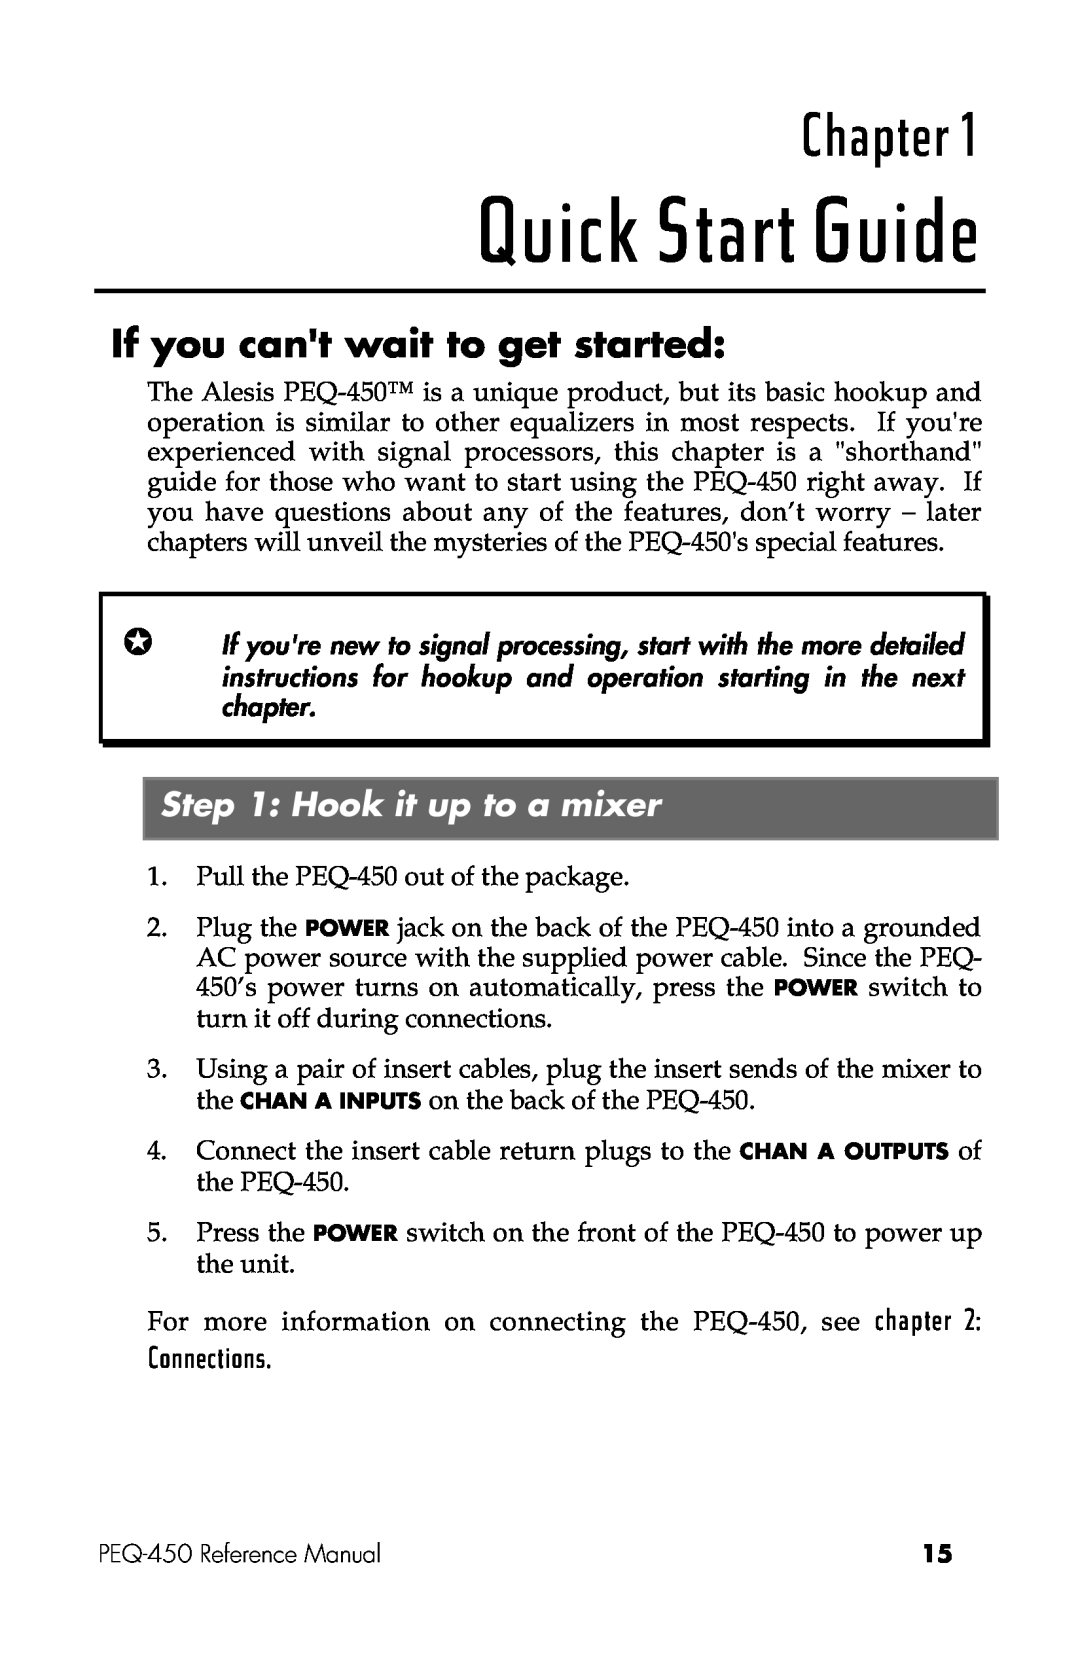 Alesis PEQ-450 manual Quick Start Guide, Chapter, If you cant wait to get started, Hook it up to a mixer, Connections 